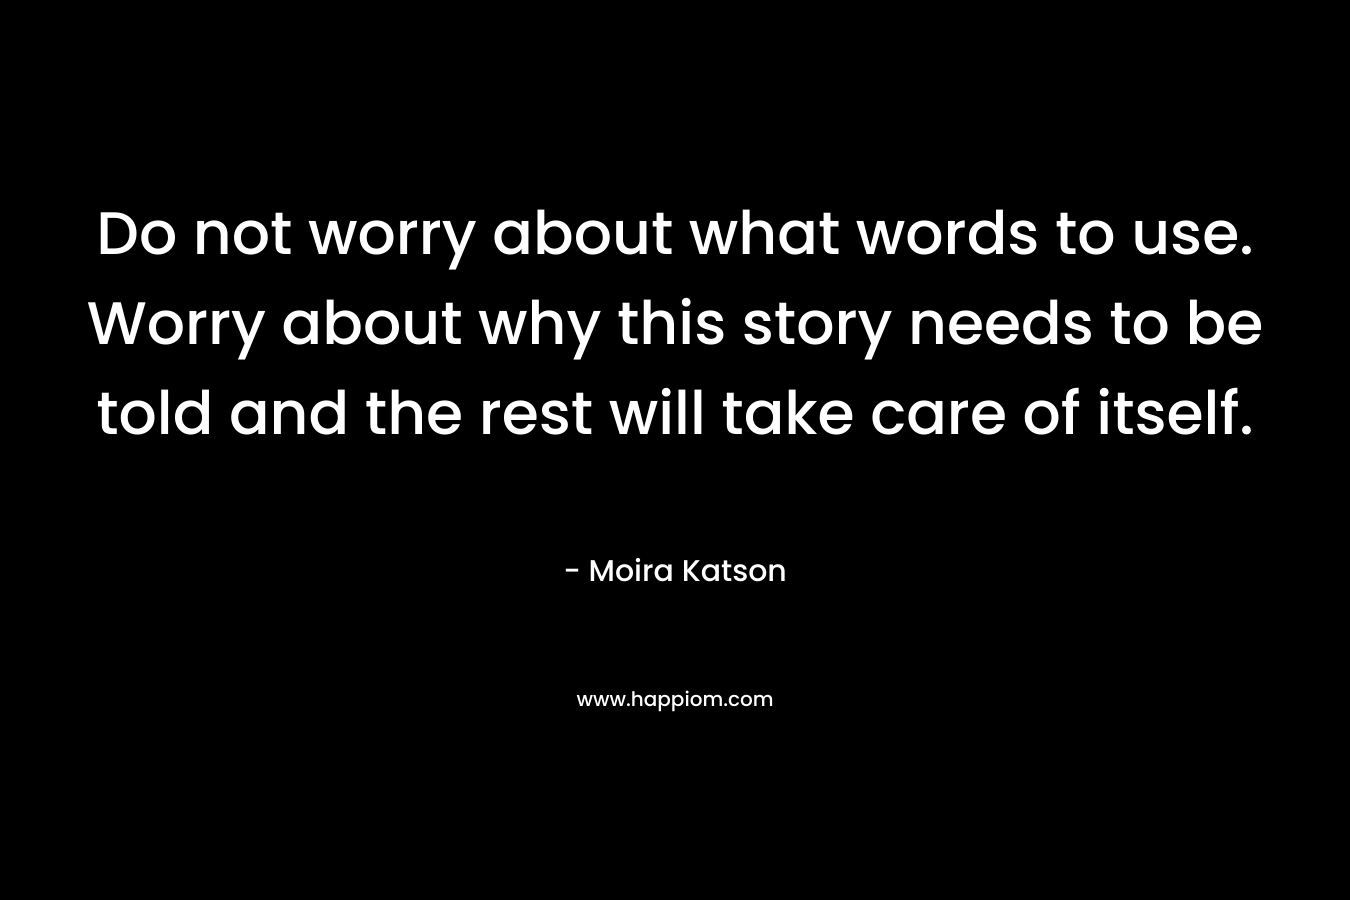 Do not worry about what words to use. Worry about why this story needs to be told and the rest will take care of itself. – Moira Katson